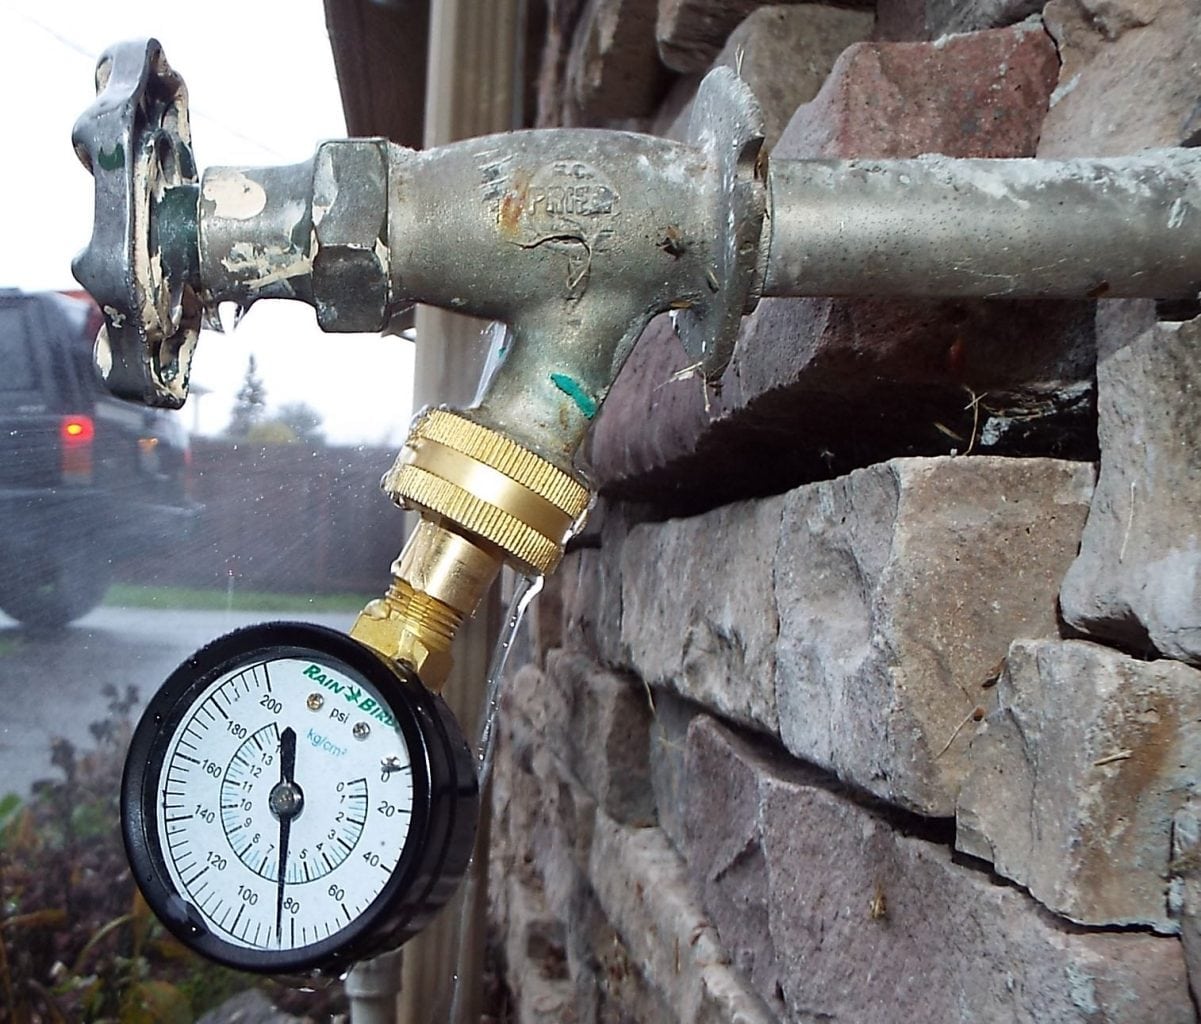 Homeowners would be lost without outside water faucets.